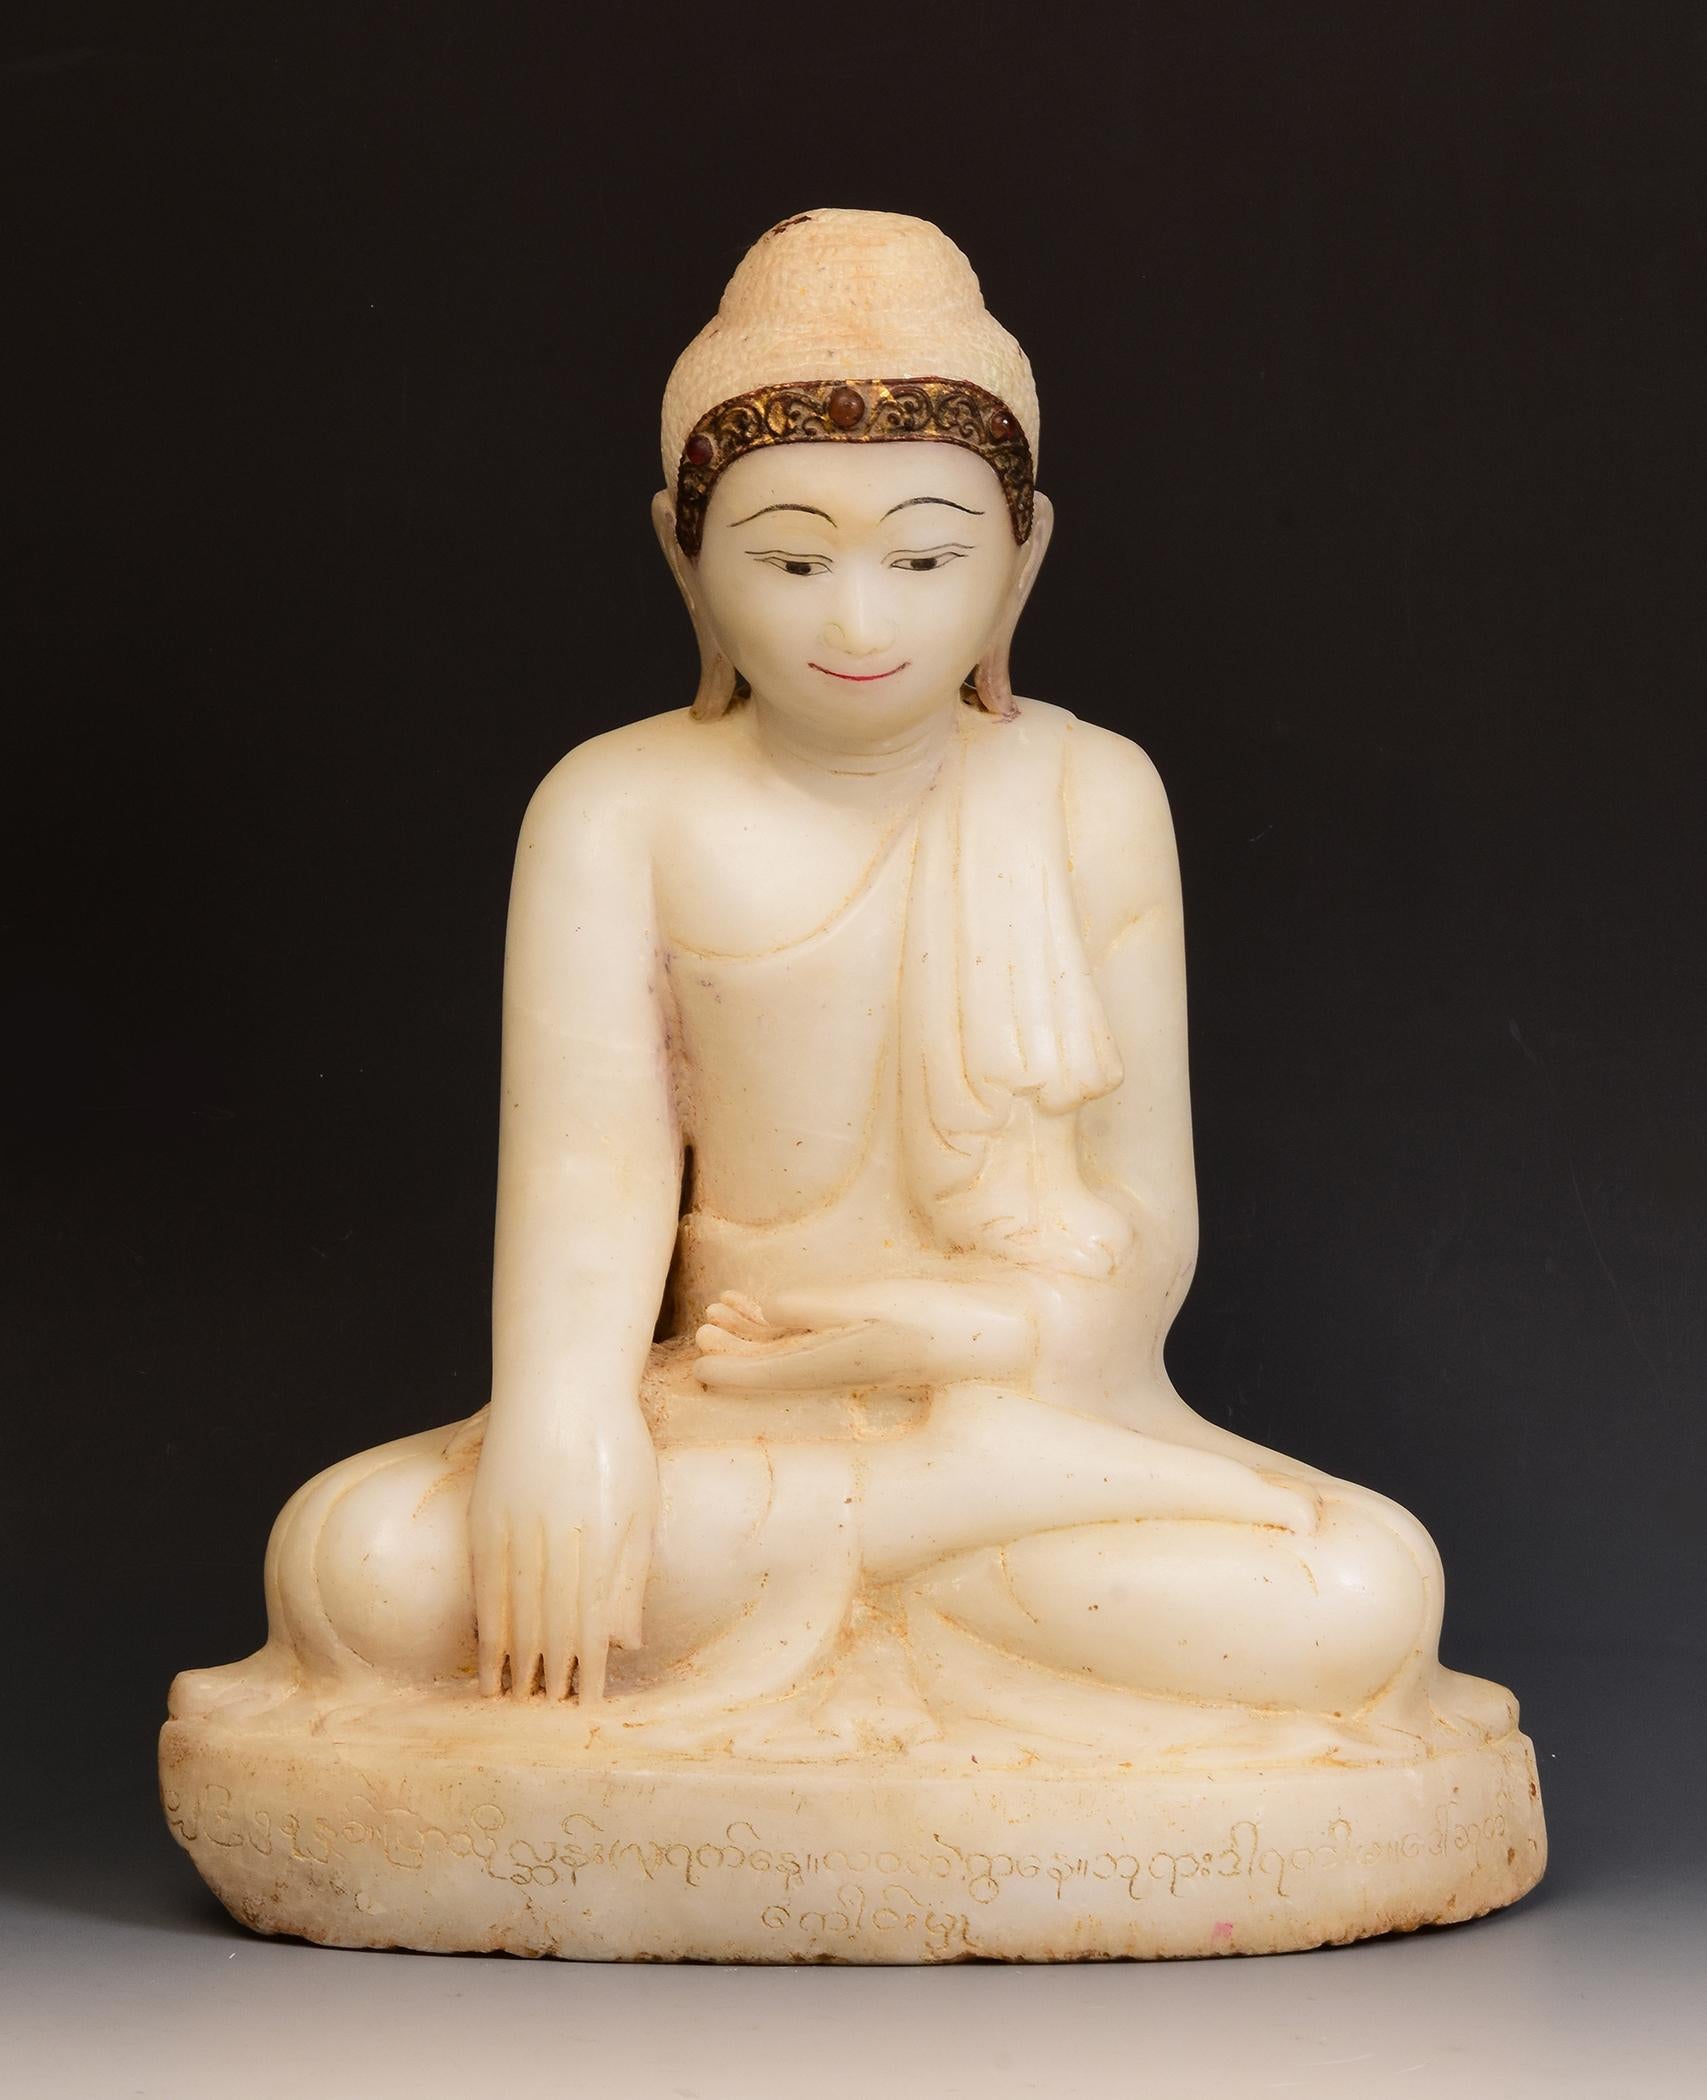 Antique Burmese alabaster Buddha sitting in Mara Vijaya (calling the earth to witness) posture on a base, with inlay of colorful glass pieces on the headband.

Age: Burma, Mandalay Period, 19th Century
Size: Height 41.6 C.M. / Width 33.5 C.M. /